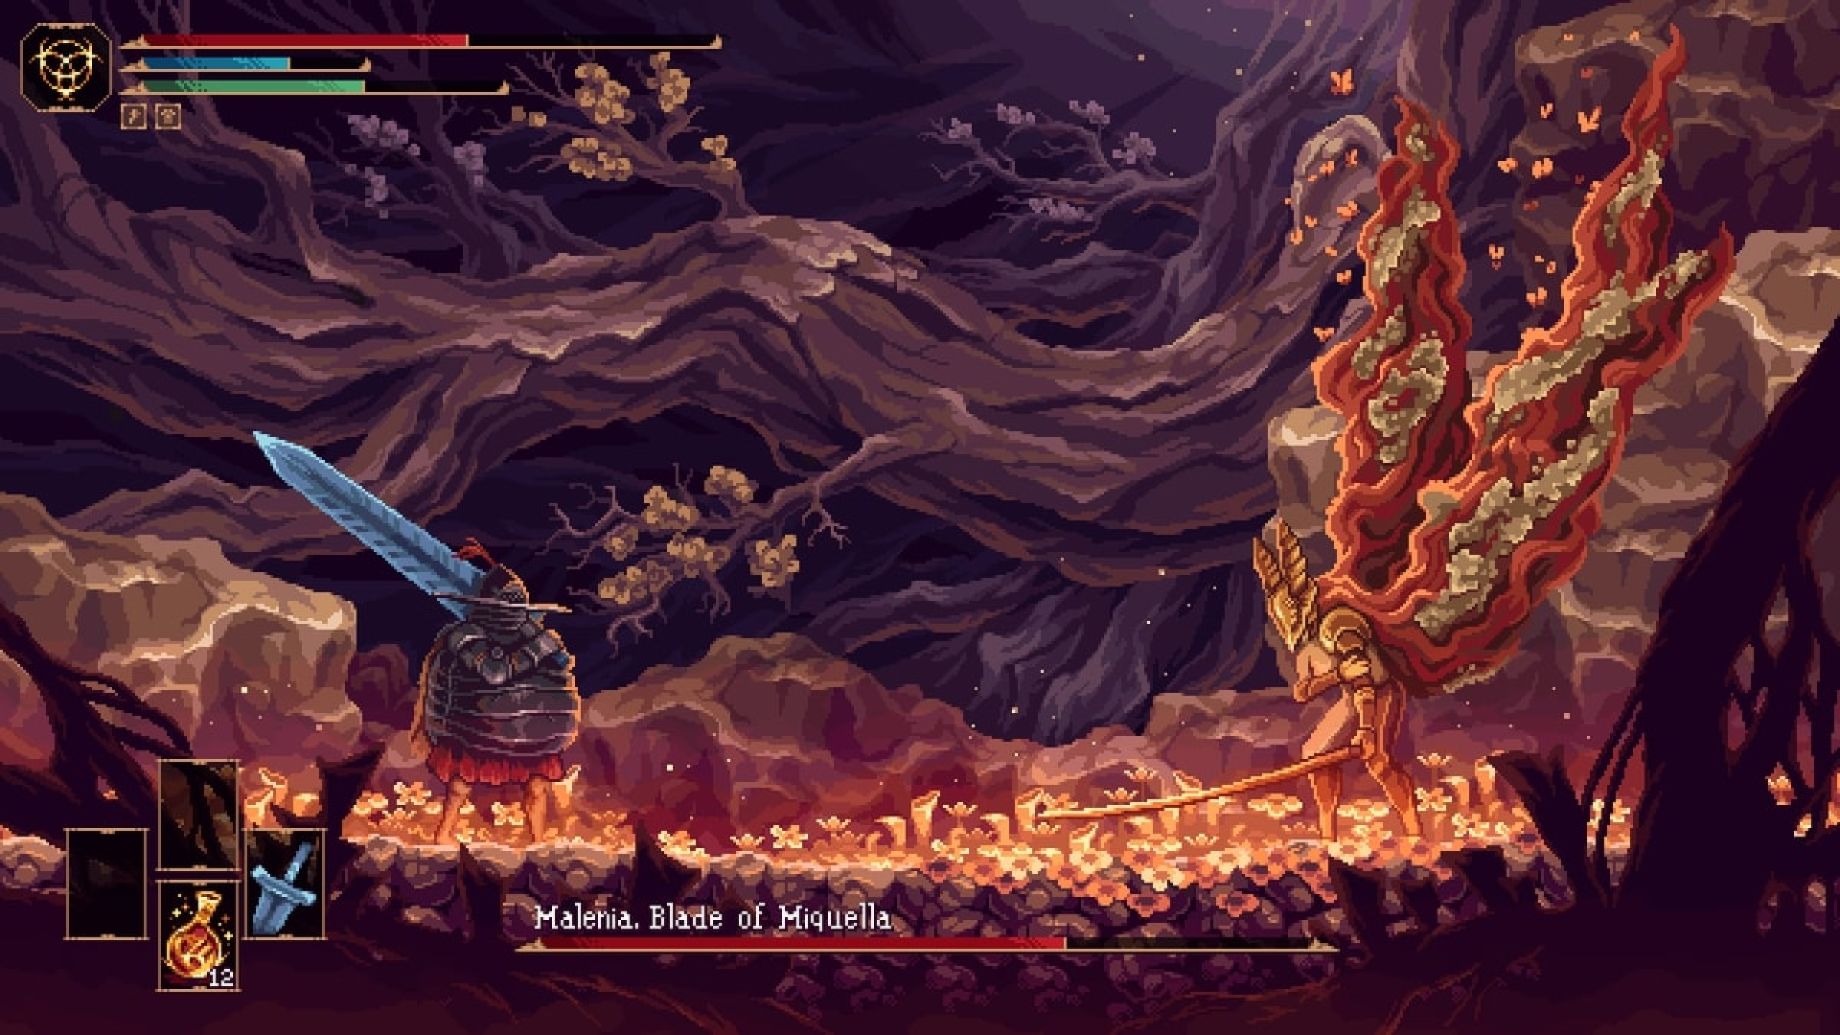 Image of the game elden ring with the character malenia